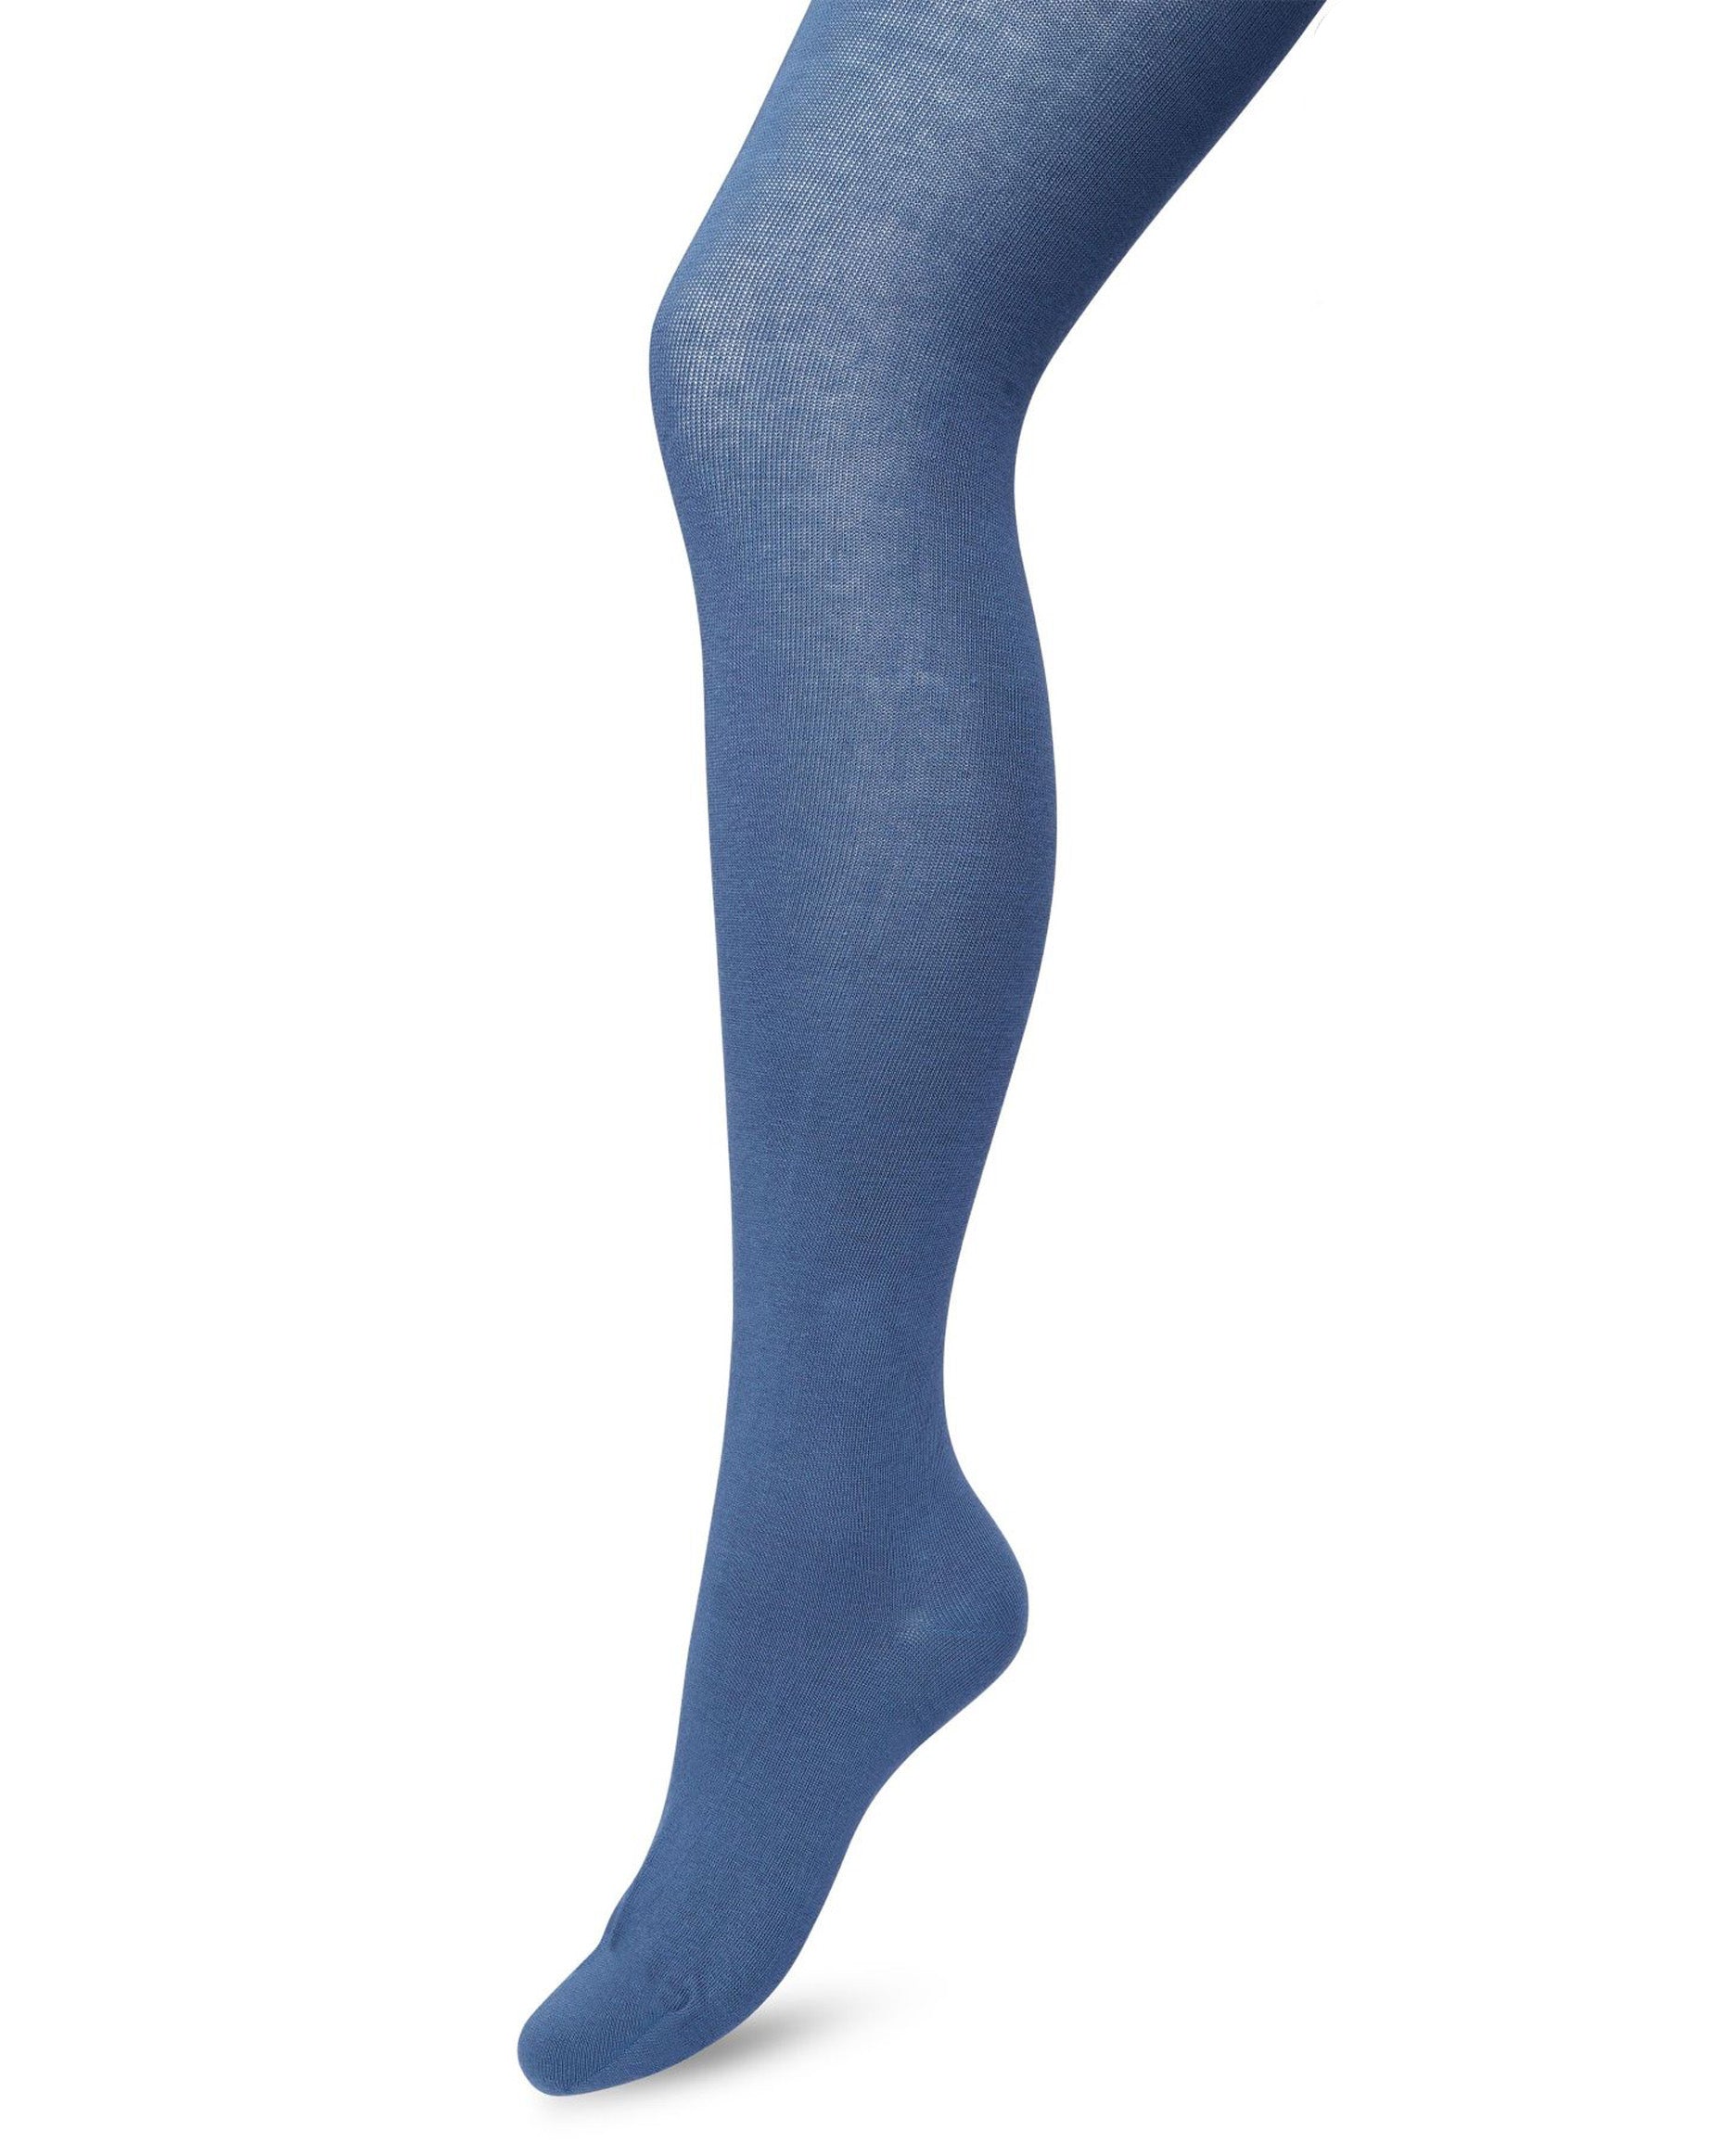 Bonnie Doon Bio Cotton Tights - Denim blue (bering sea) Warm and soft knitted organic cotton Winter thermal tights.